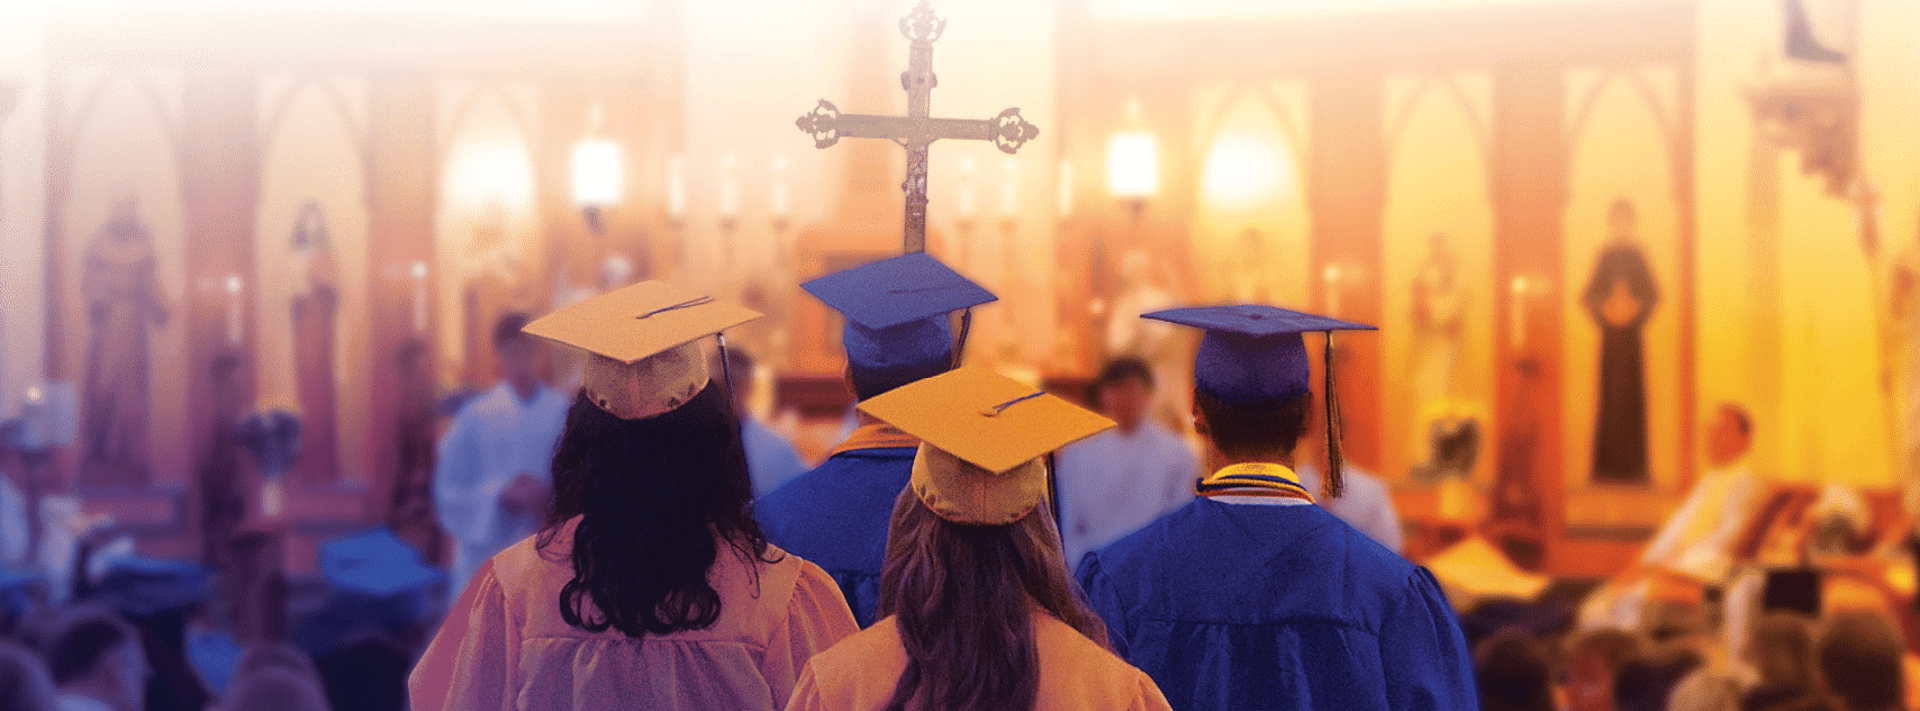 students in graduation gowns walking with a cross 